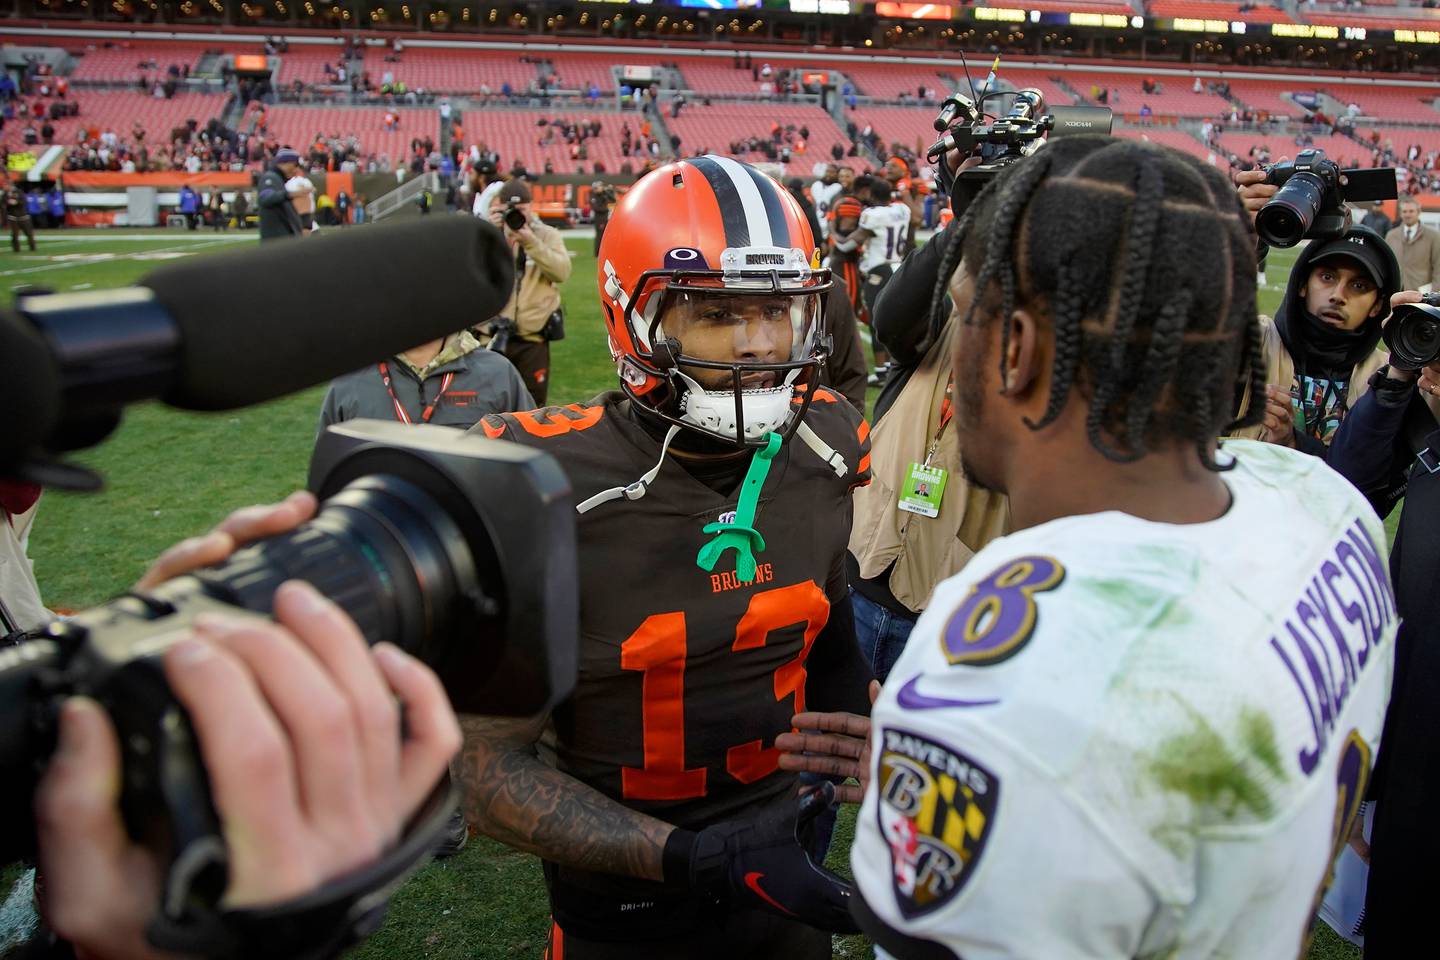 CLEVELAND, OH - DECEMBER 22:  Lamar Jackson #8 of the Baltimore Ravens shakes hands with Odell Beckham Jr. #13 of the Cleveland Browns after the game at FirstEnergy Stadium on December 22, 2019 in Cleveland, Ohio. Baltimore defeated Cleveland 31-15.